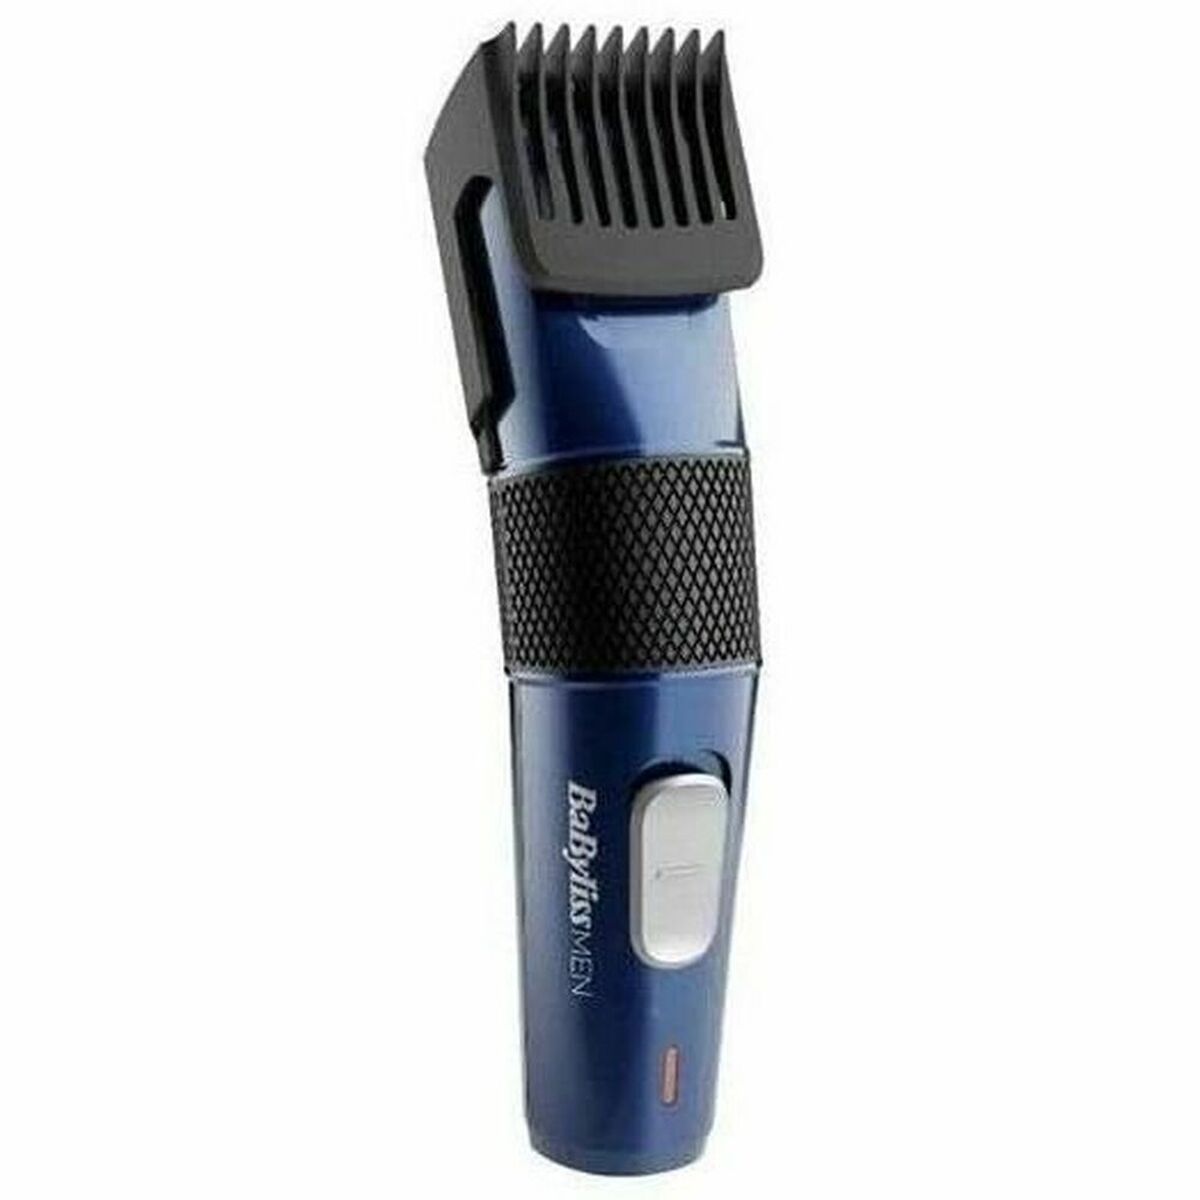 Hair clippers/Shaver Babyliss 7756E-0